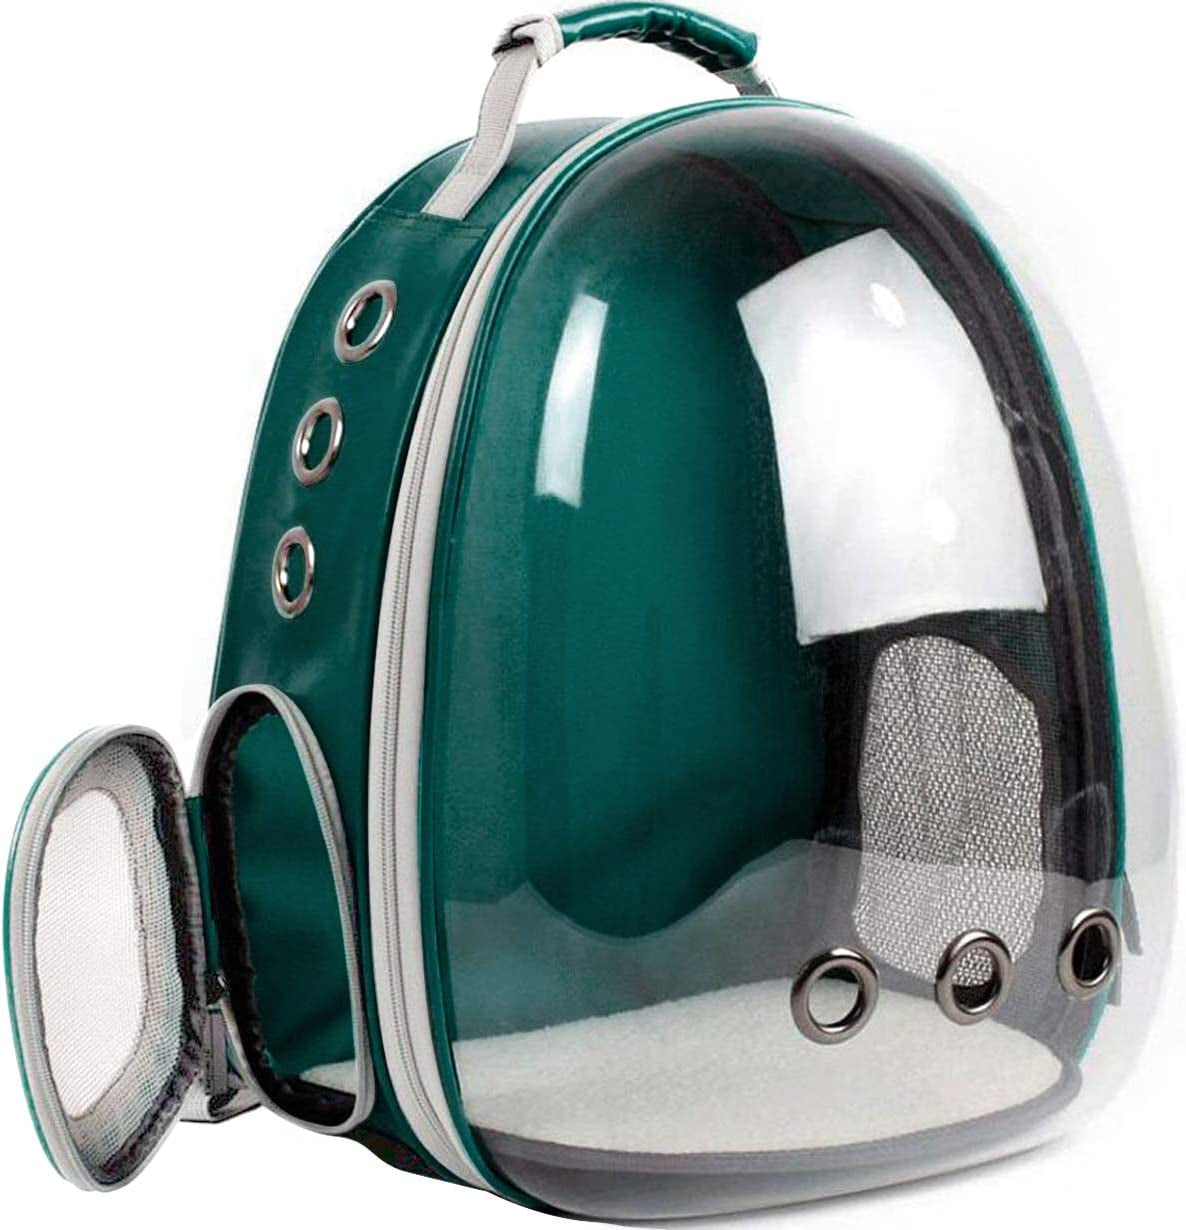 "Premium Bubble Capsule Pet Carrier: Airline Approved Cat Backpack for Small to Medium Cats - Transparent, Comfortable, and Convenient!"